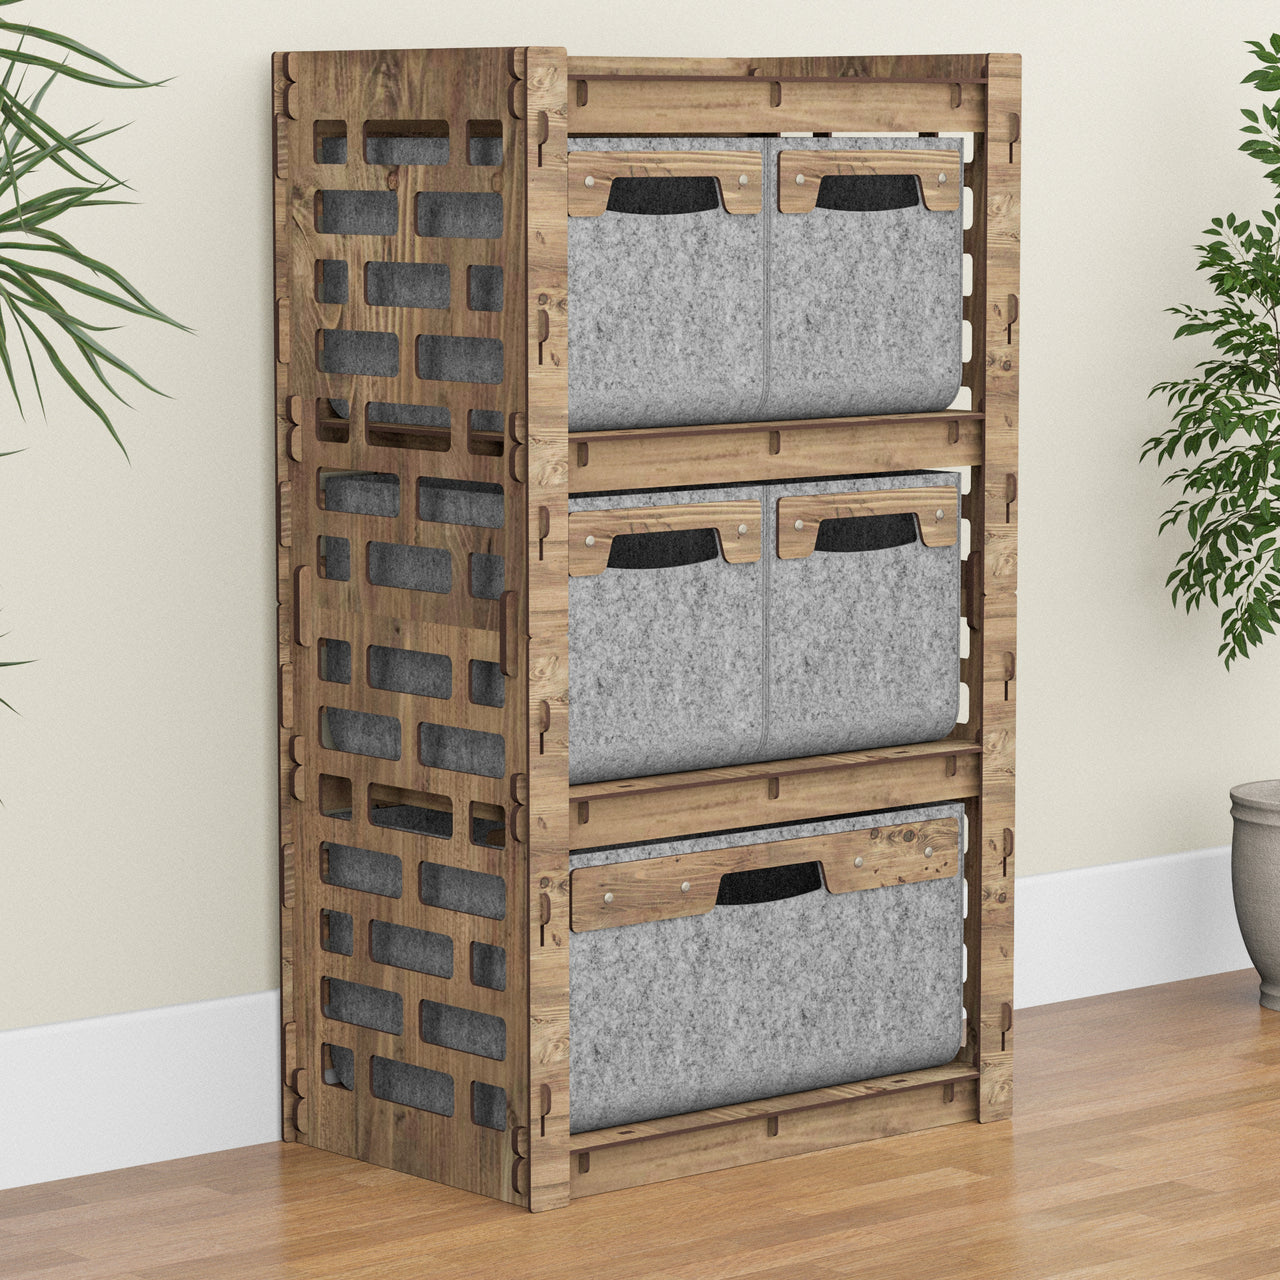 Brickwall Chest Of 5 Drawers Storage Cabinet [1L 4S GRAY BINS]